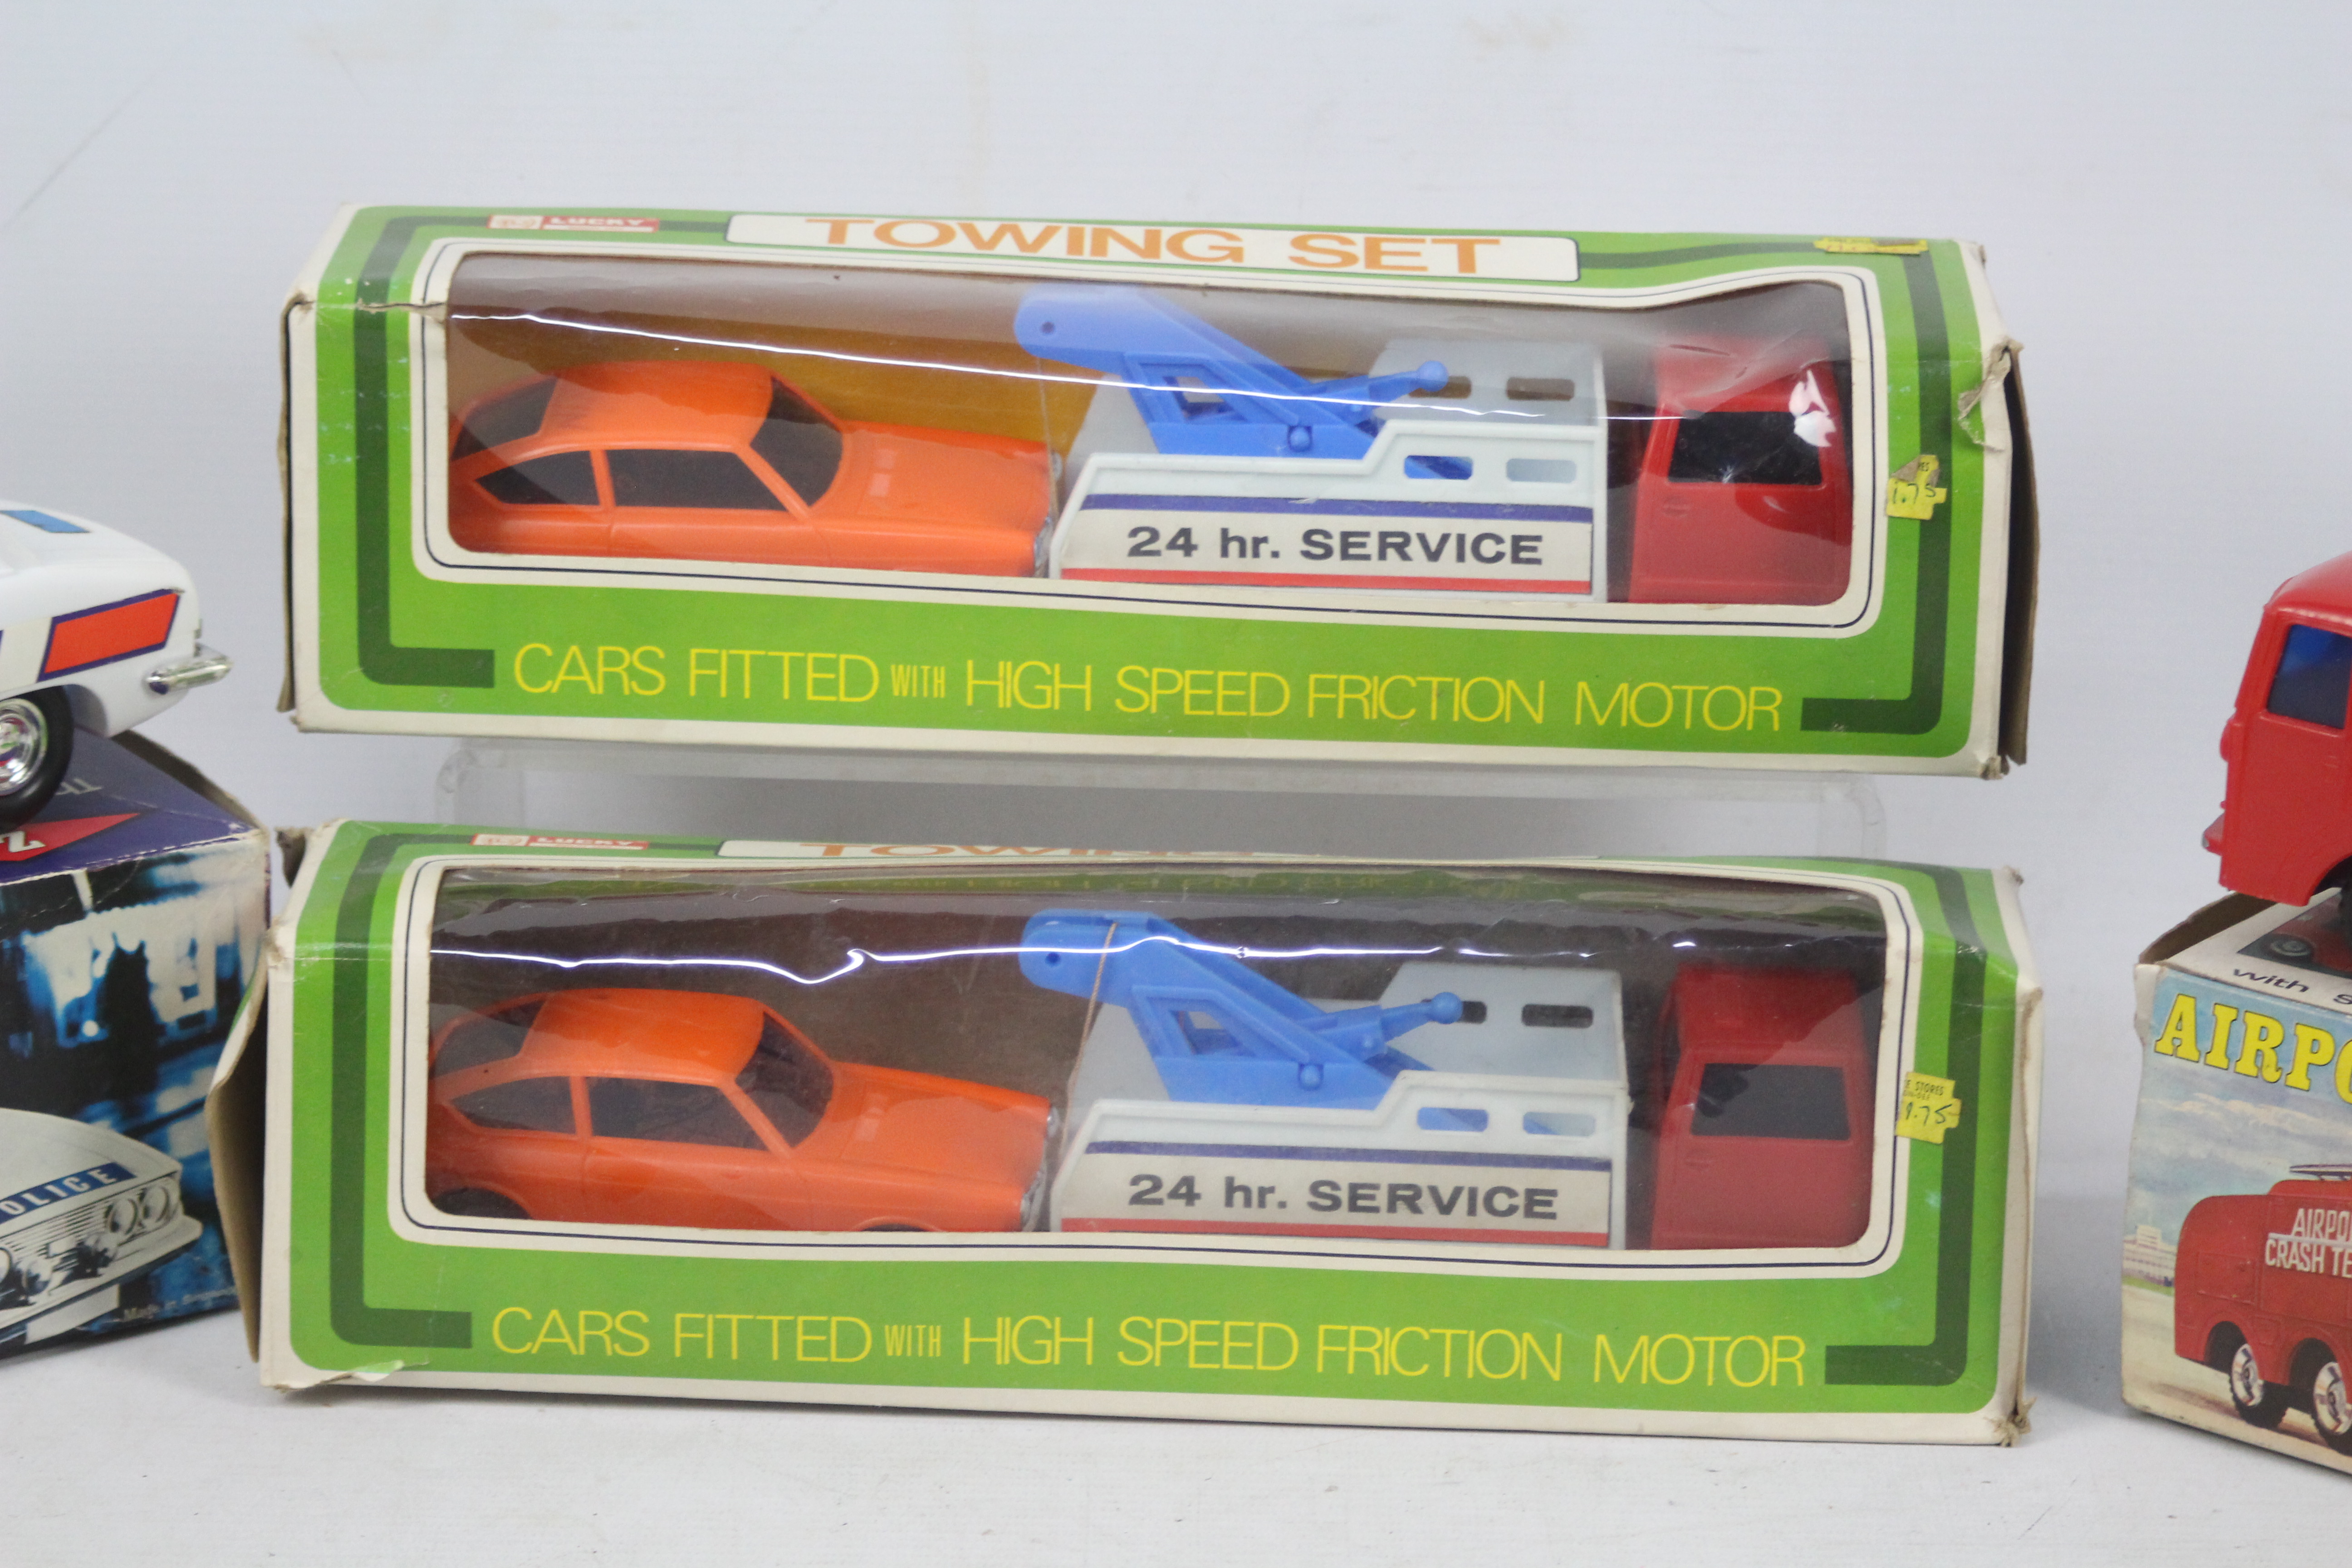 Lucky Toys - NFIC - Bradgate - 4 x boxed models, Z Victor 4 the talking Triumph 2000 Police car, - Image 2 of 5